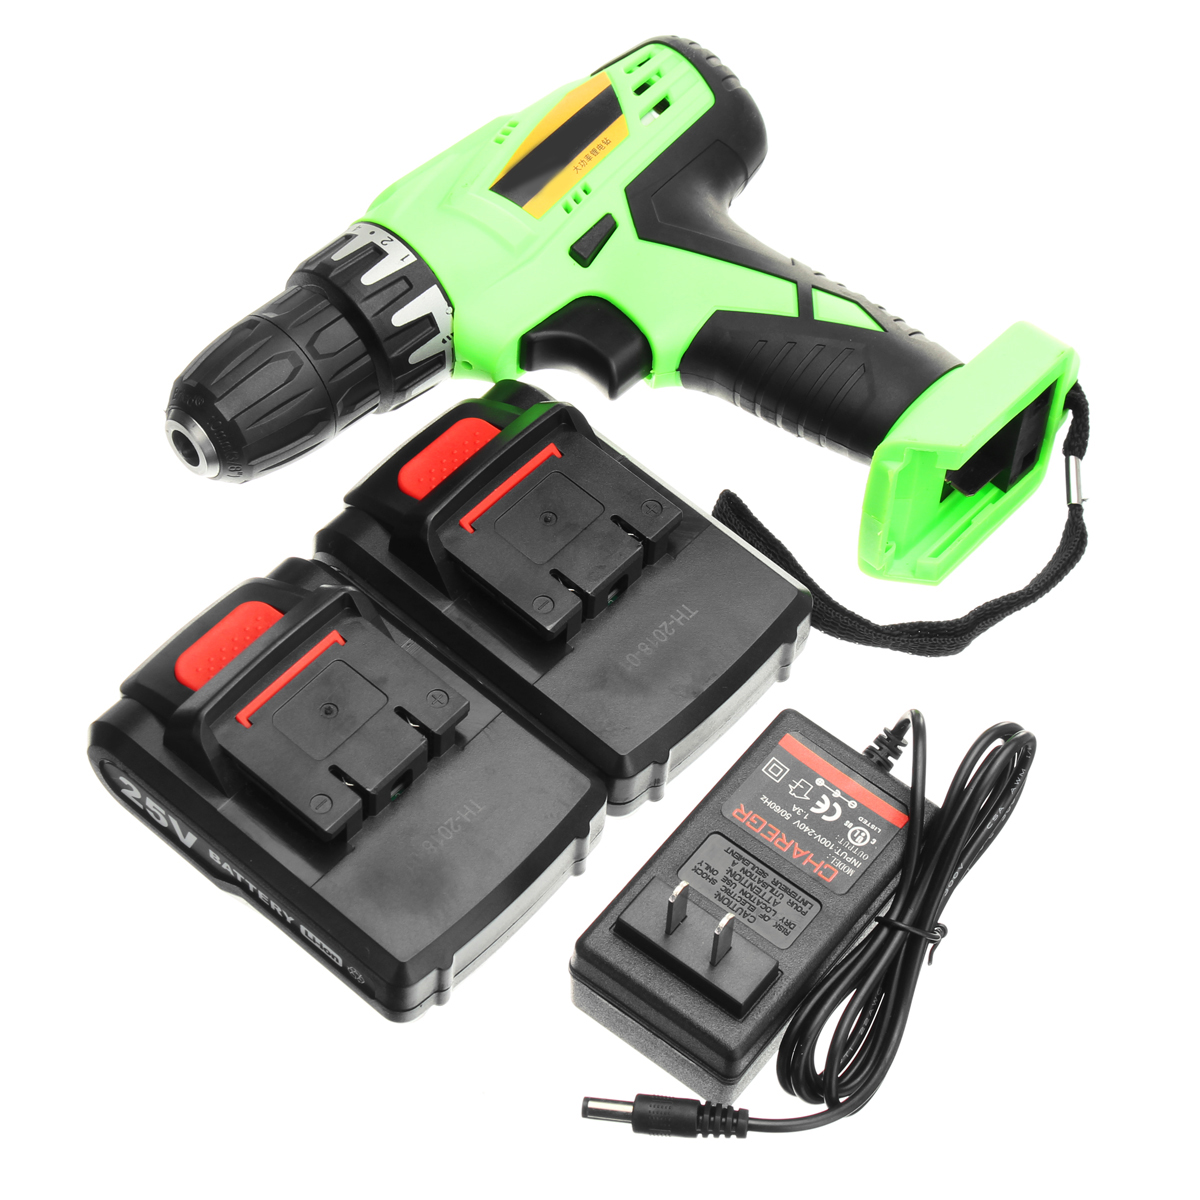 25V-Cordless-Power-Drill-2-Lithium-Ion-Battery-Rechargeable-Electric-Screwdriver-Kit-1275028-4